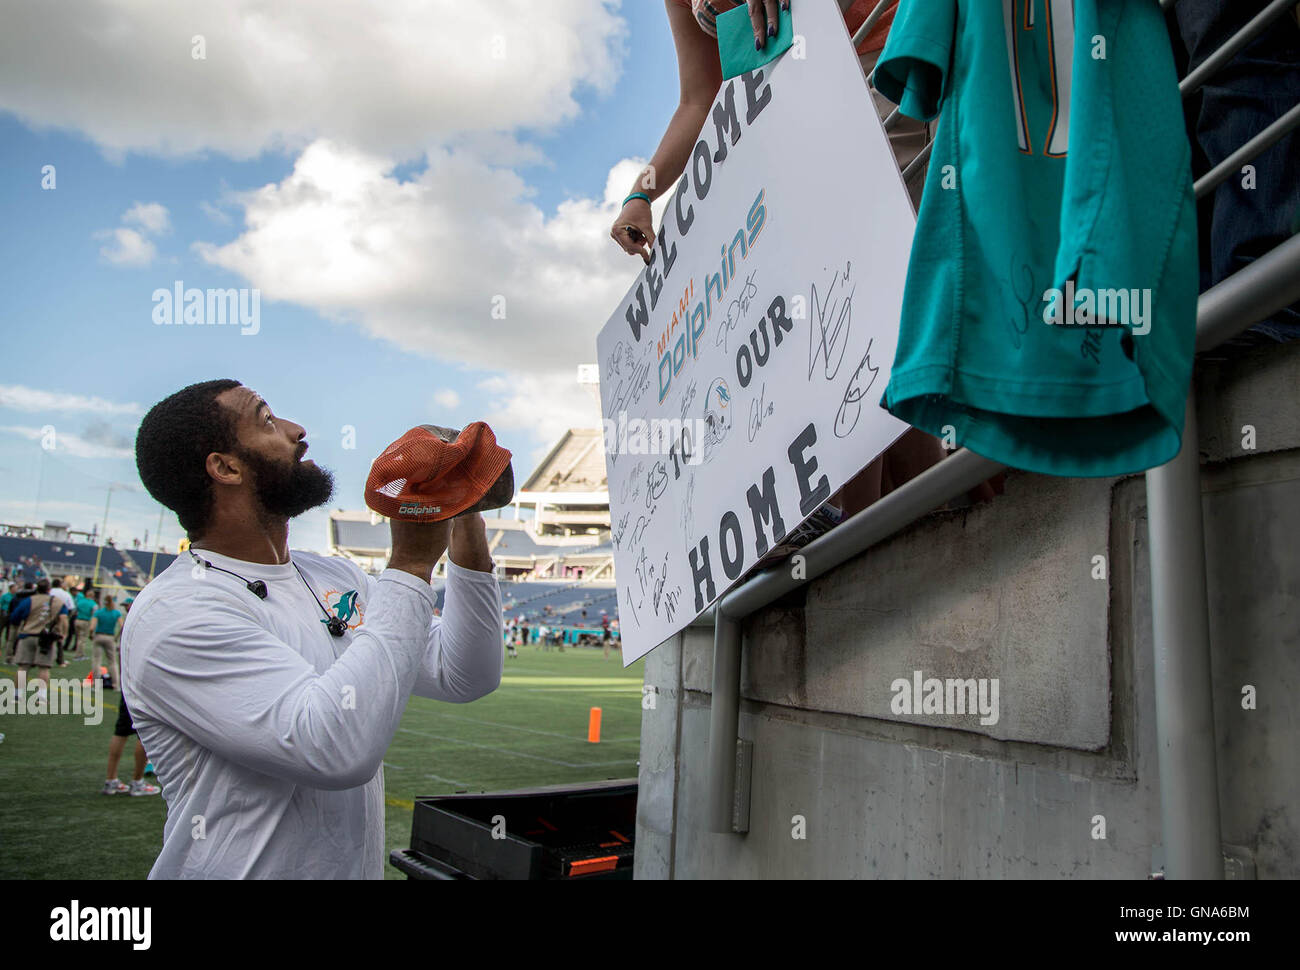 Orlando, Florida, USA. 29th Aug, 2016. Miami Dolphins linebacker Spencer Paysinger (42) signs autographs at Camping World Stadium in Orlando, Florida on August 25, 2016. Credit:  Allen Eyestone/The Palm Beach Post/ZUMA Wire/Alamy Live News Stock Photo